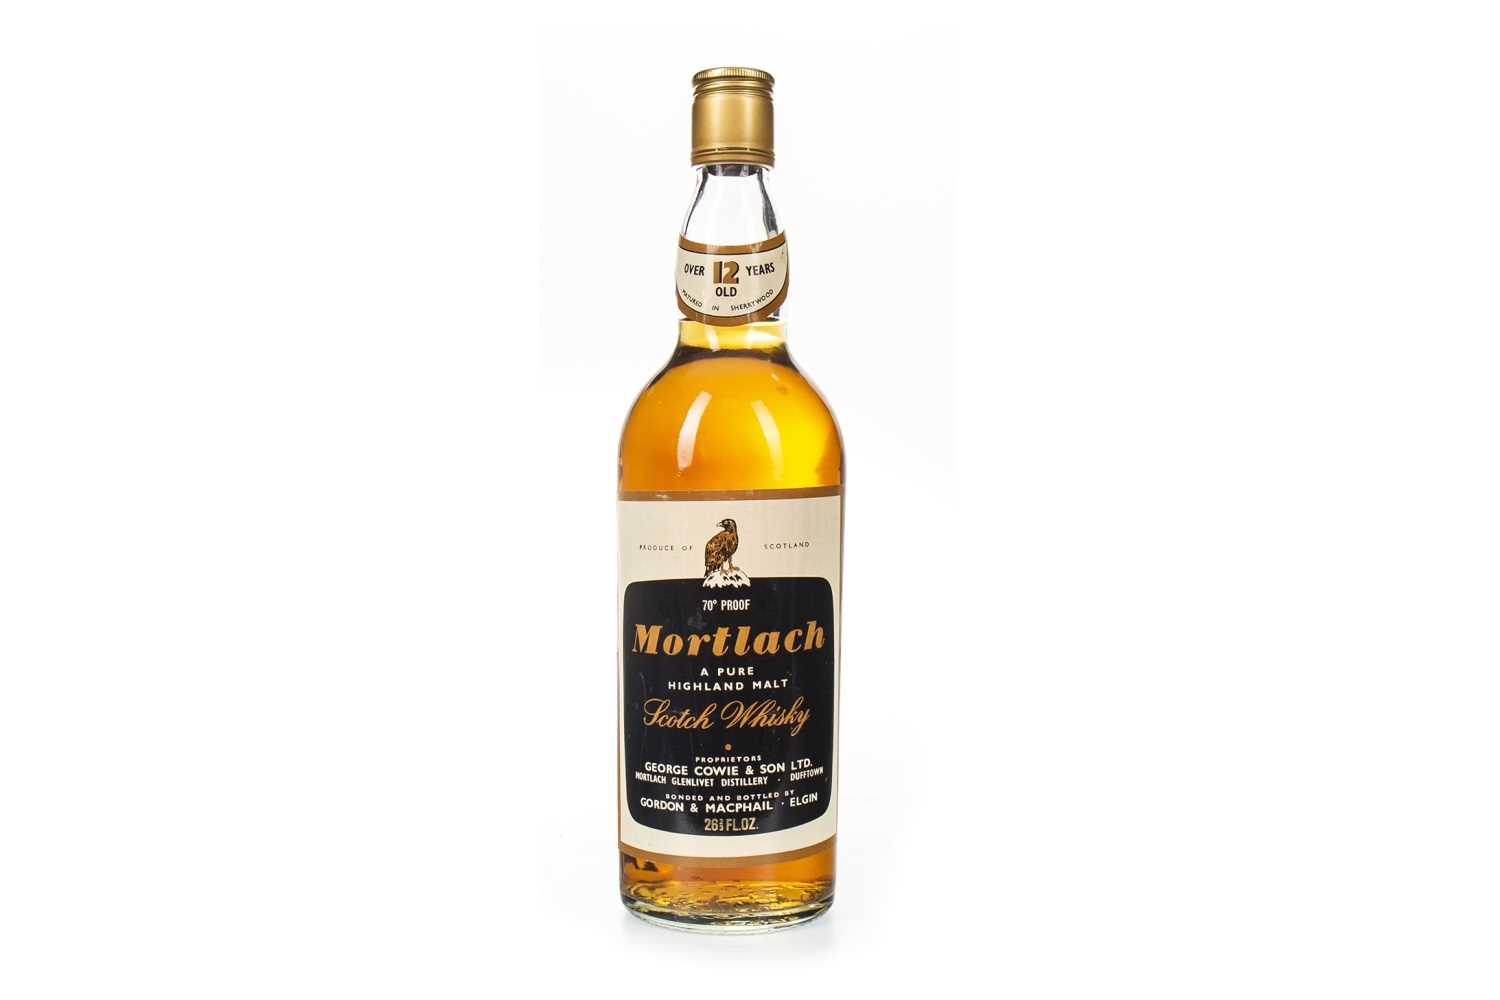 Lot 226 - MORTLACH OVER 12 YEARS OLD 26 2/3 FL.OZ